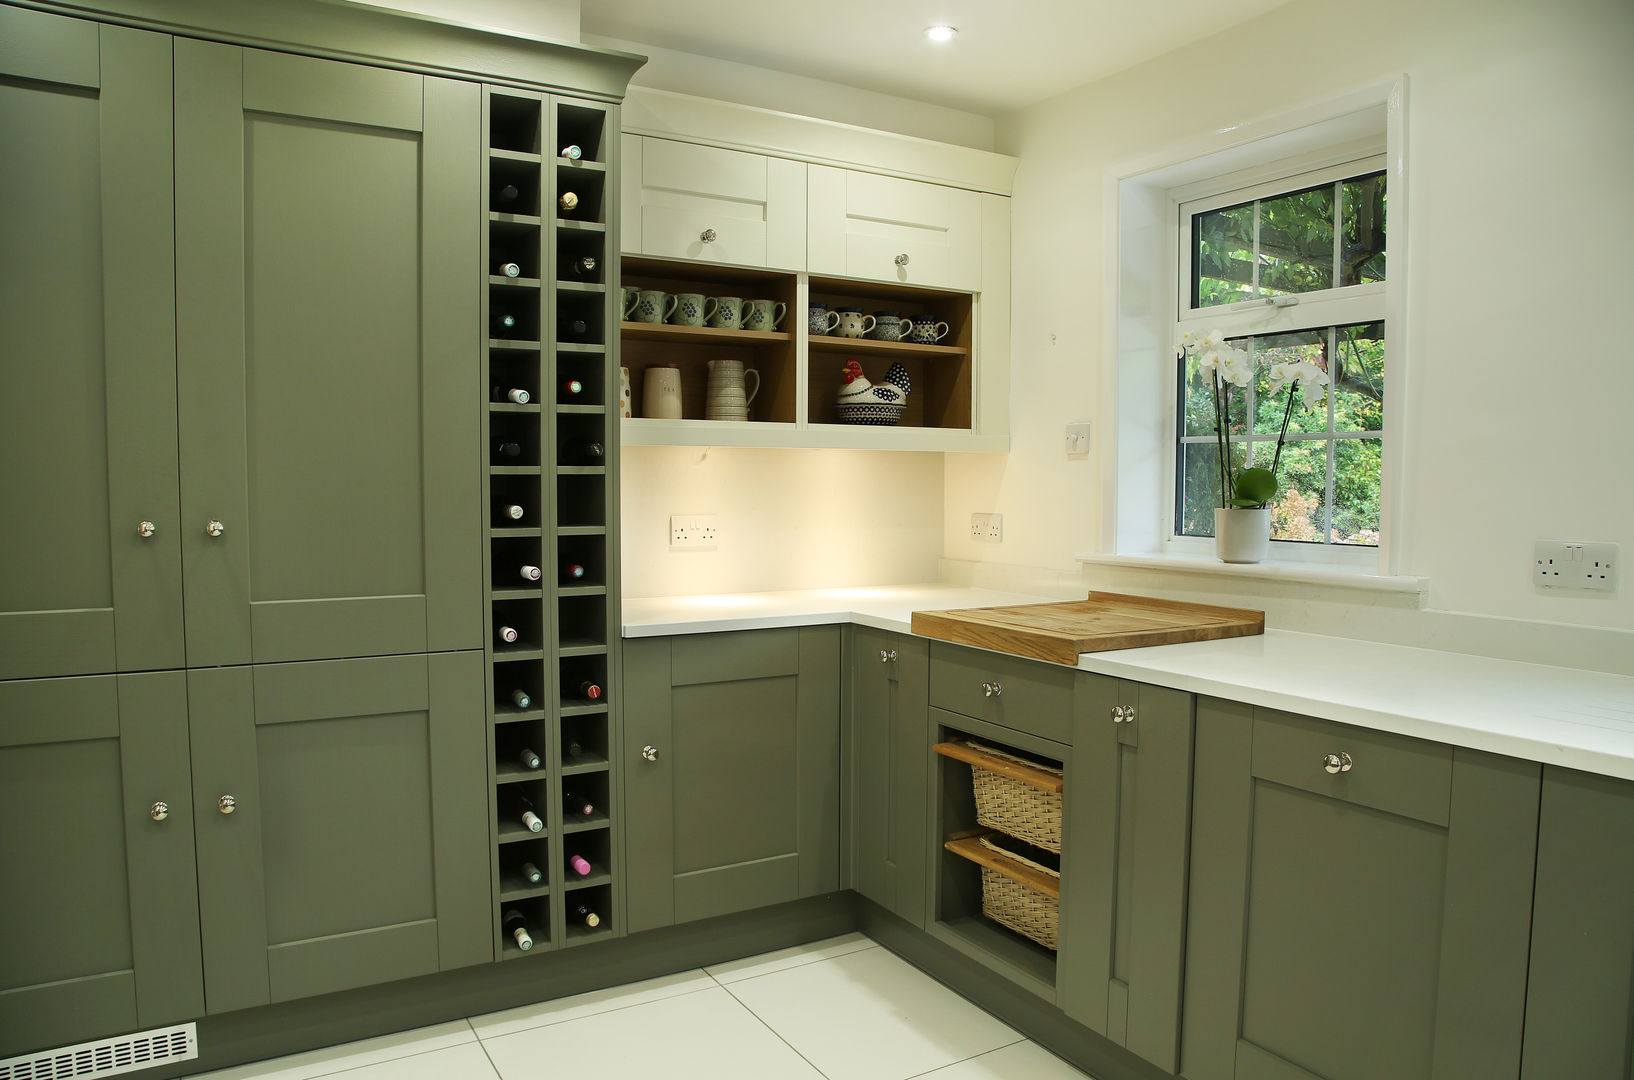 Kitchen with a Contemporary Colour Scheme: Olive & Ivory, Hehku Hehku クラシックデザインの キッチン